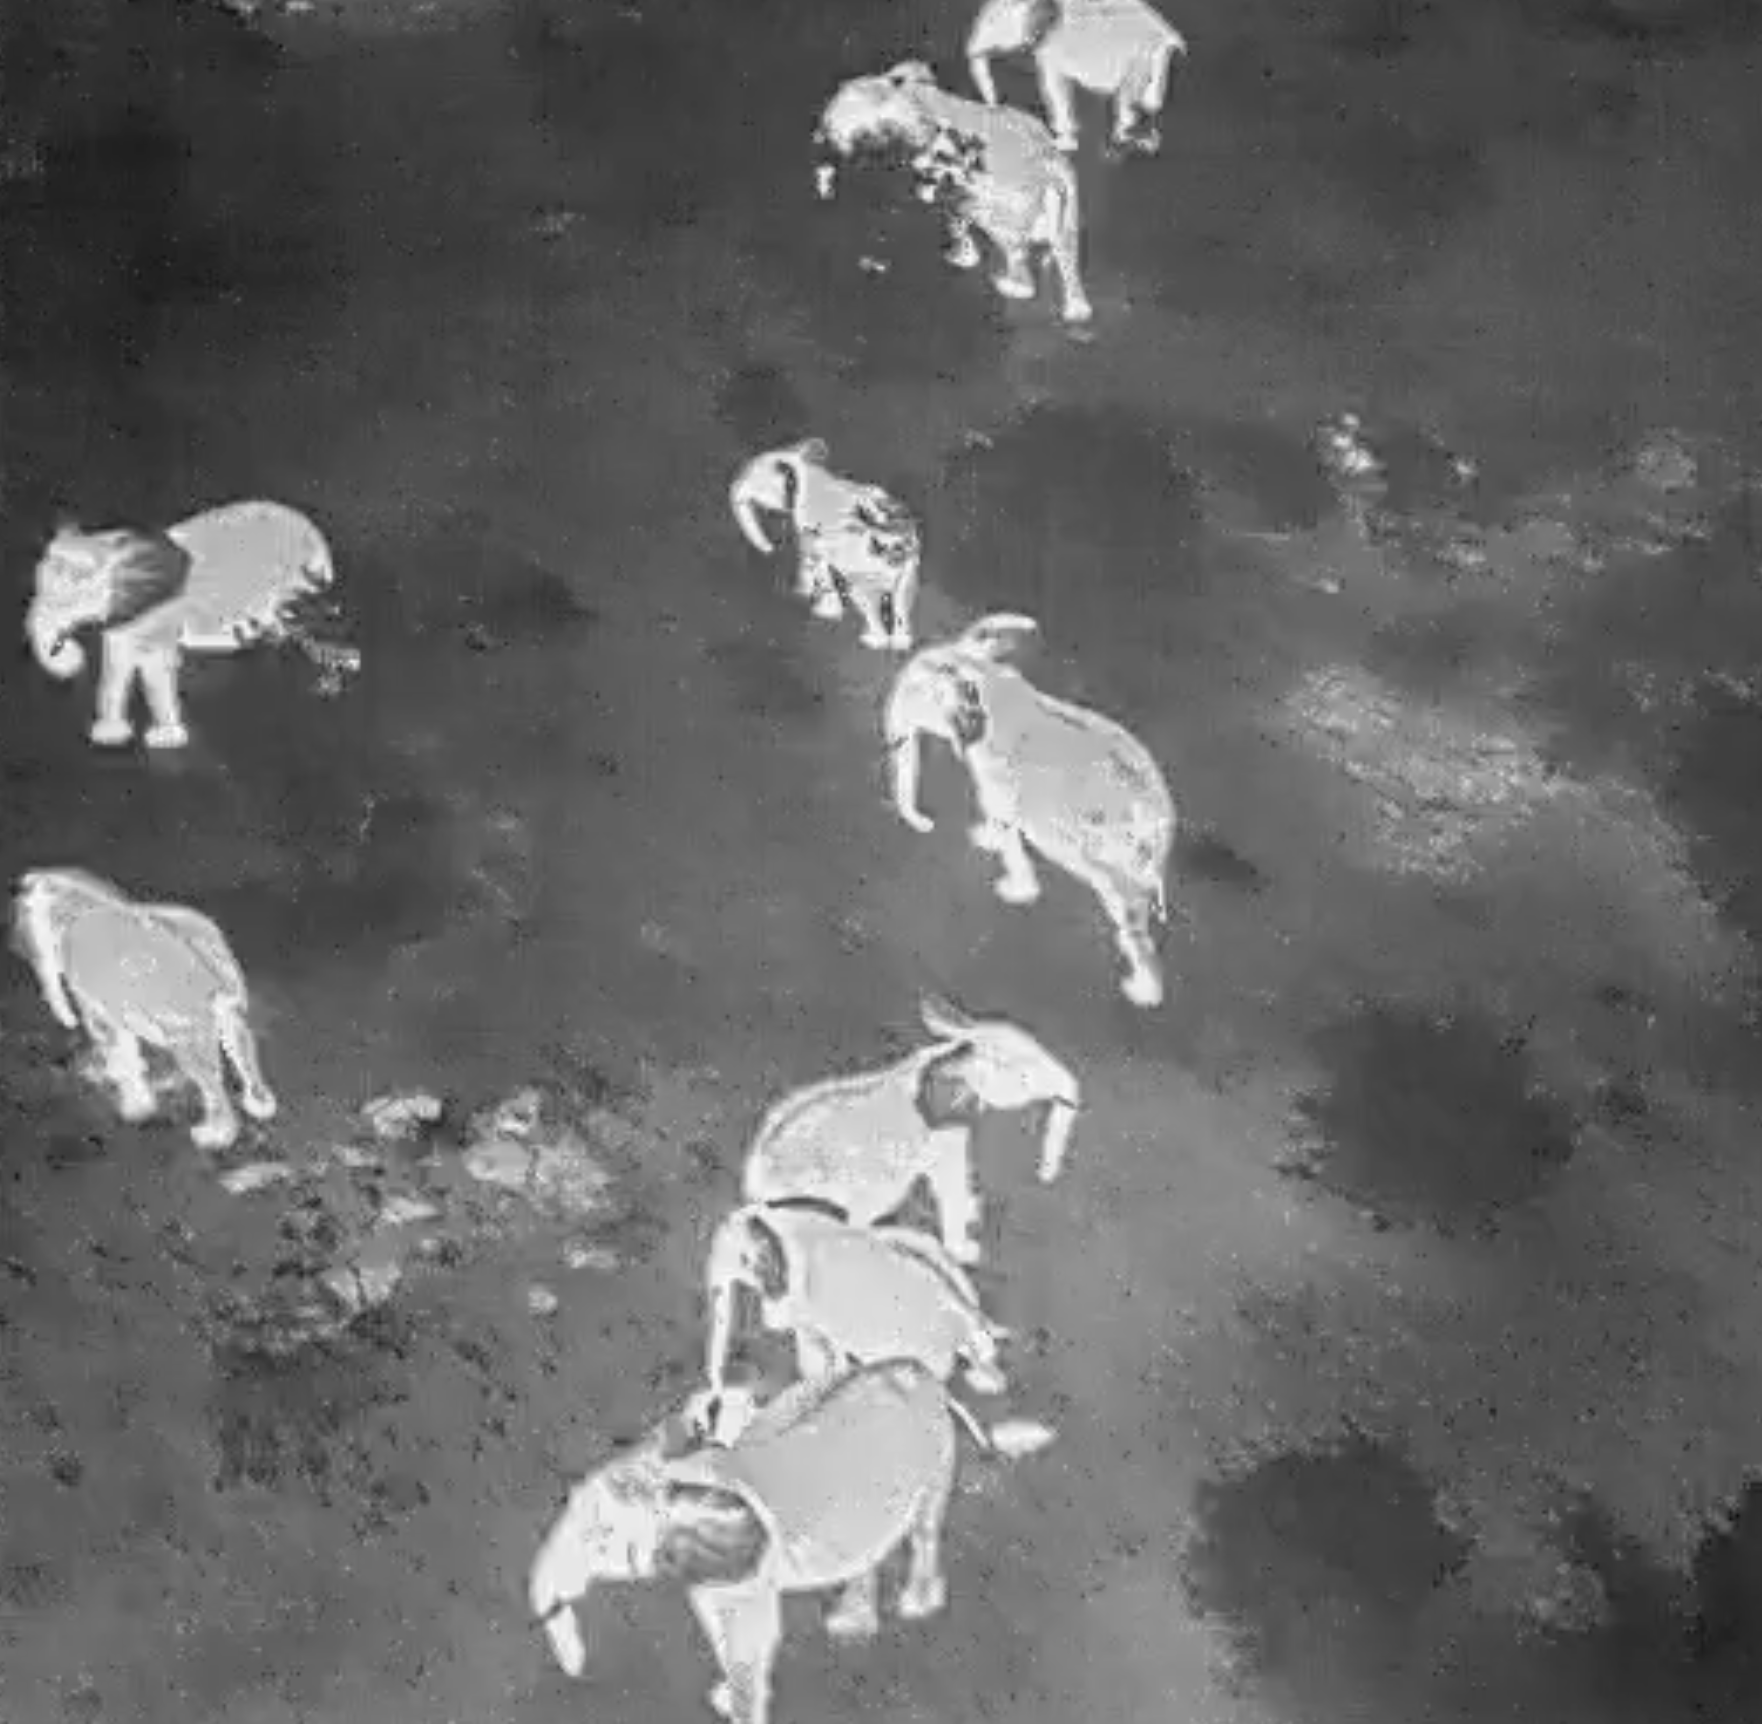 Thermal imaging detects the heat in the elephants